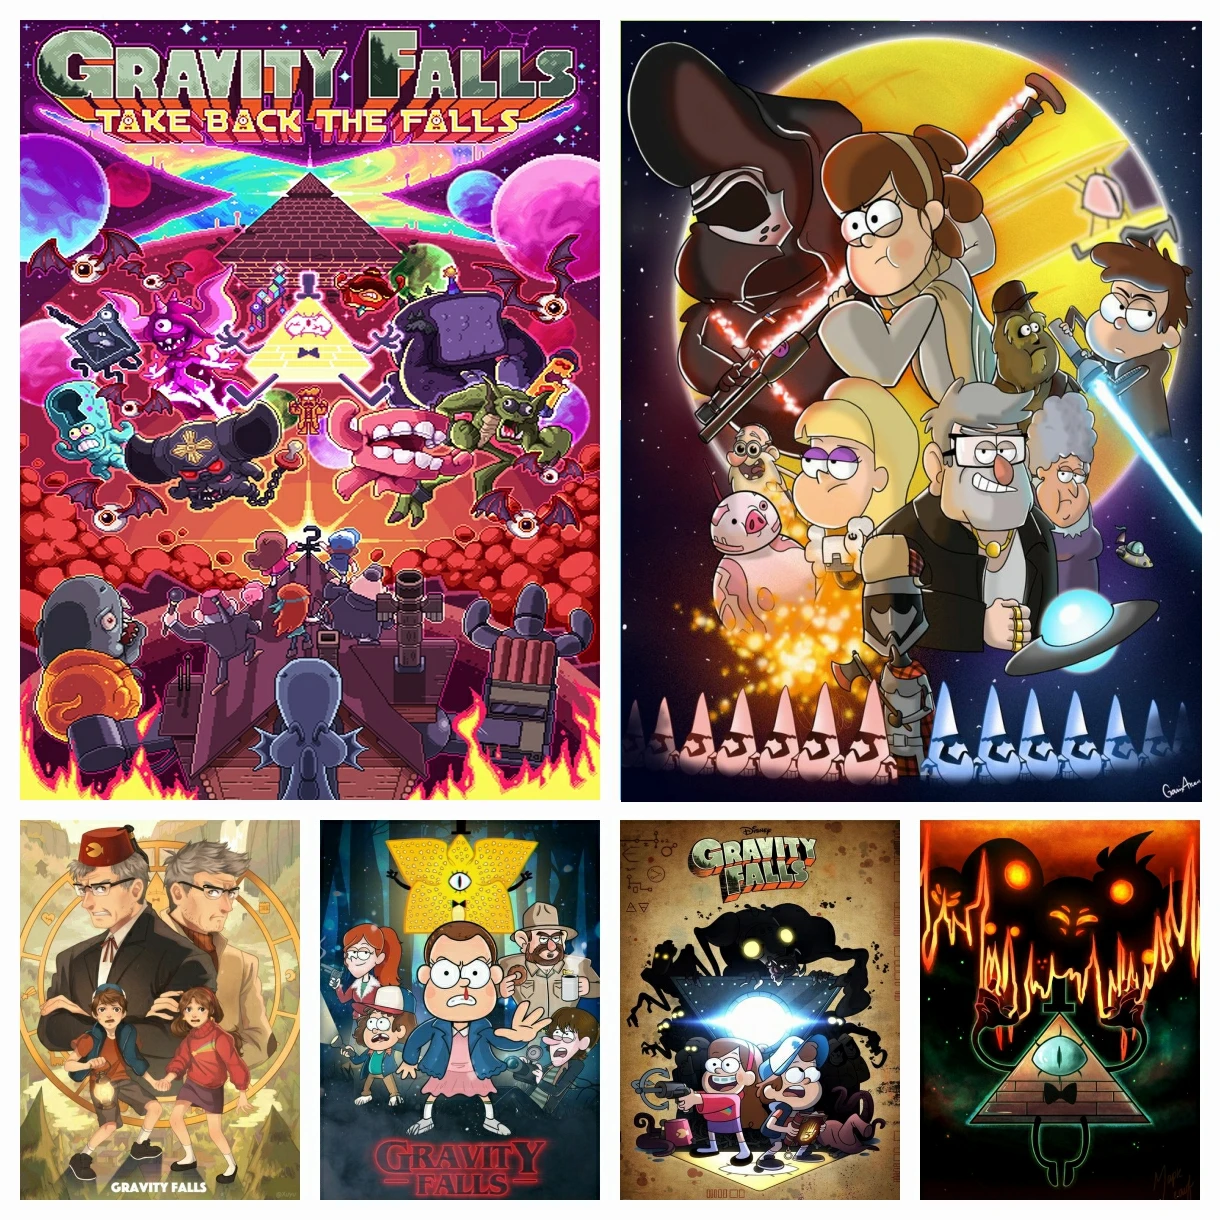 

Disney Cartoon Gravity Falls 5D DIY Diamond Painting Mosaic Dipper And Mabel Pines Embroidery Cross Stitch Home Decor For Kids